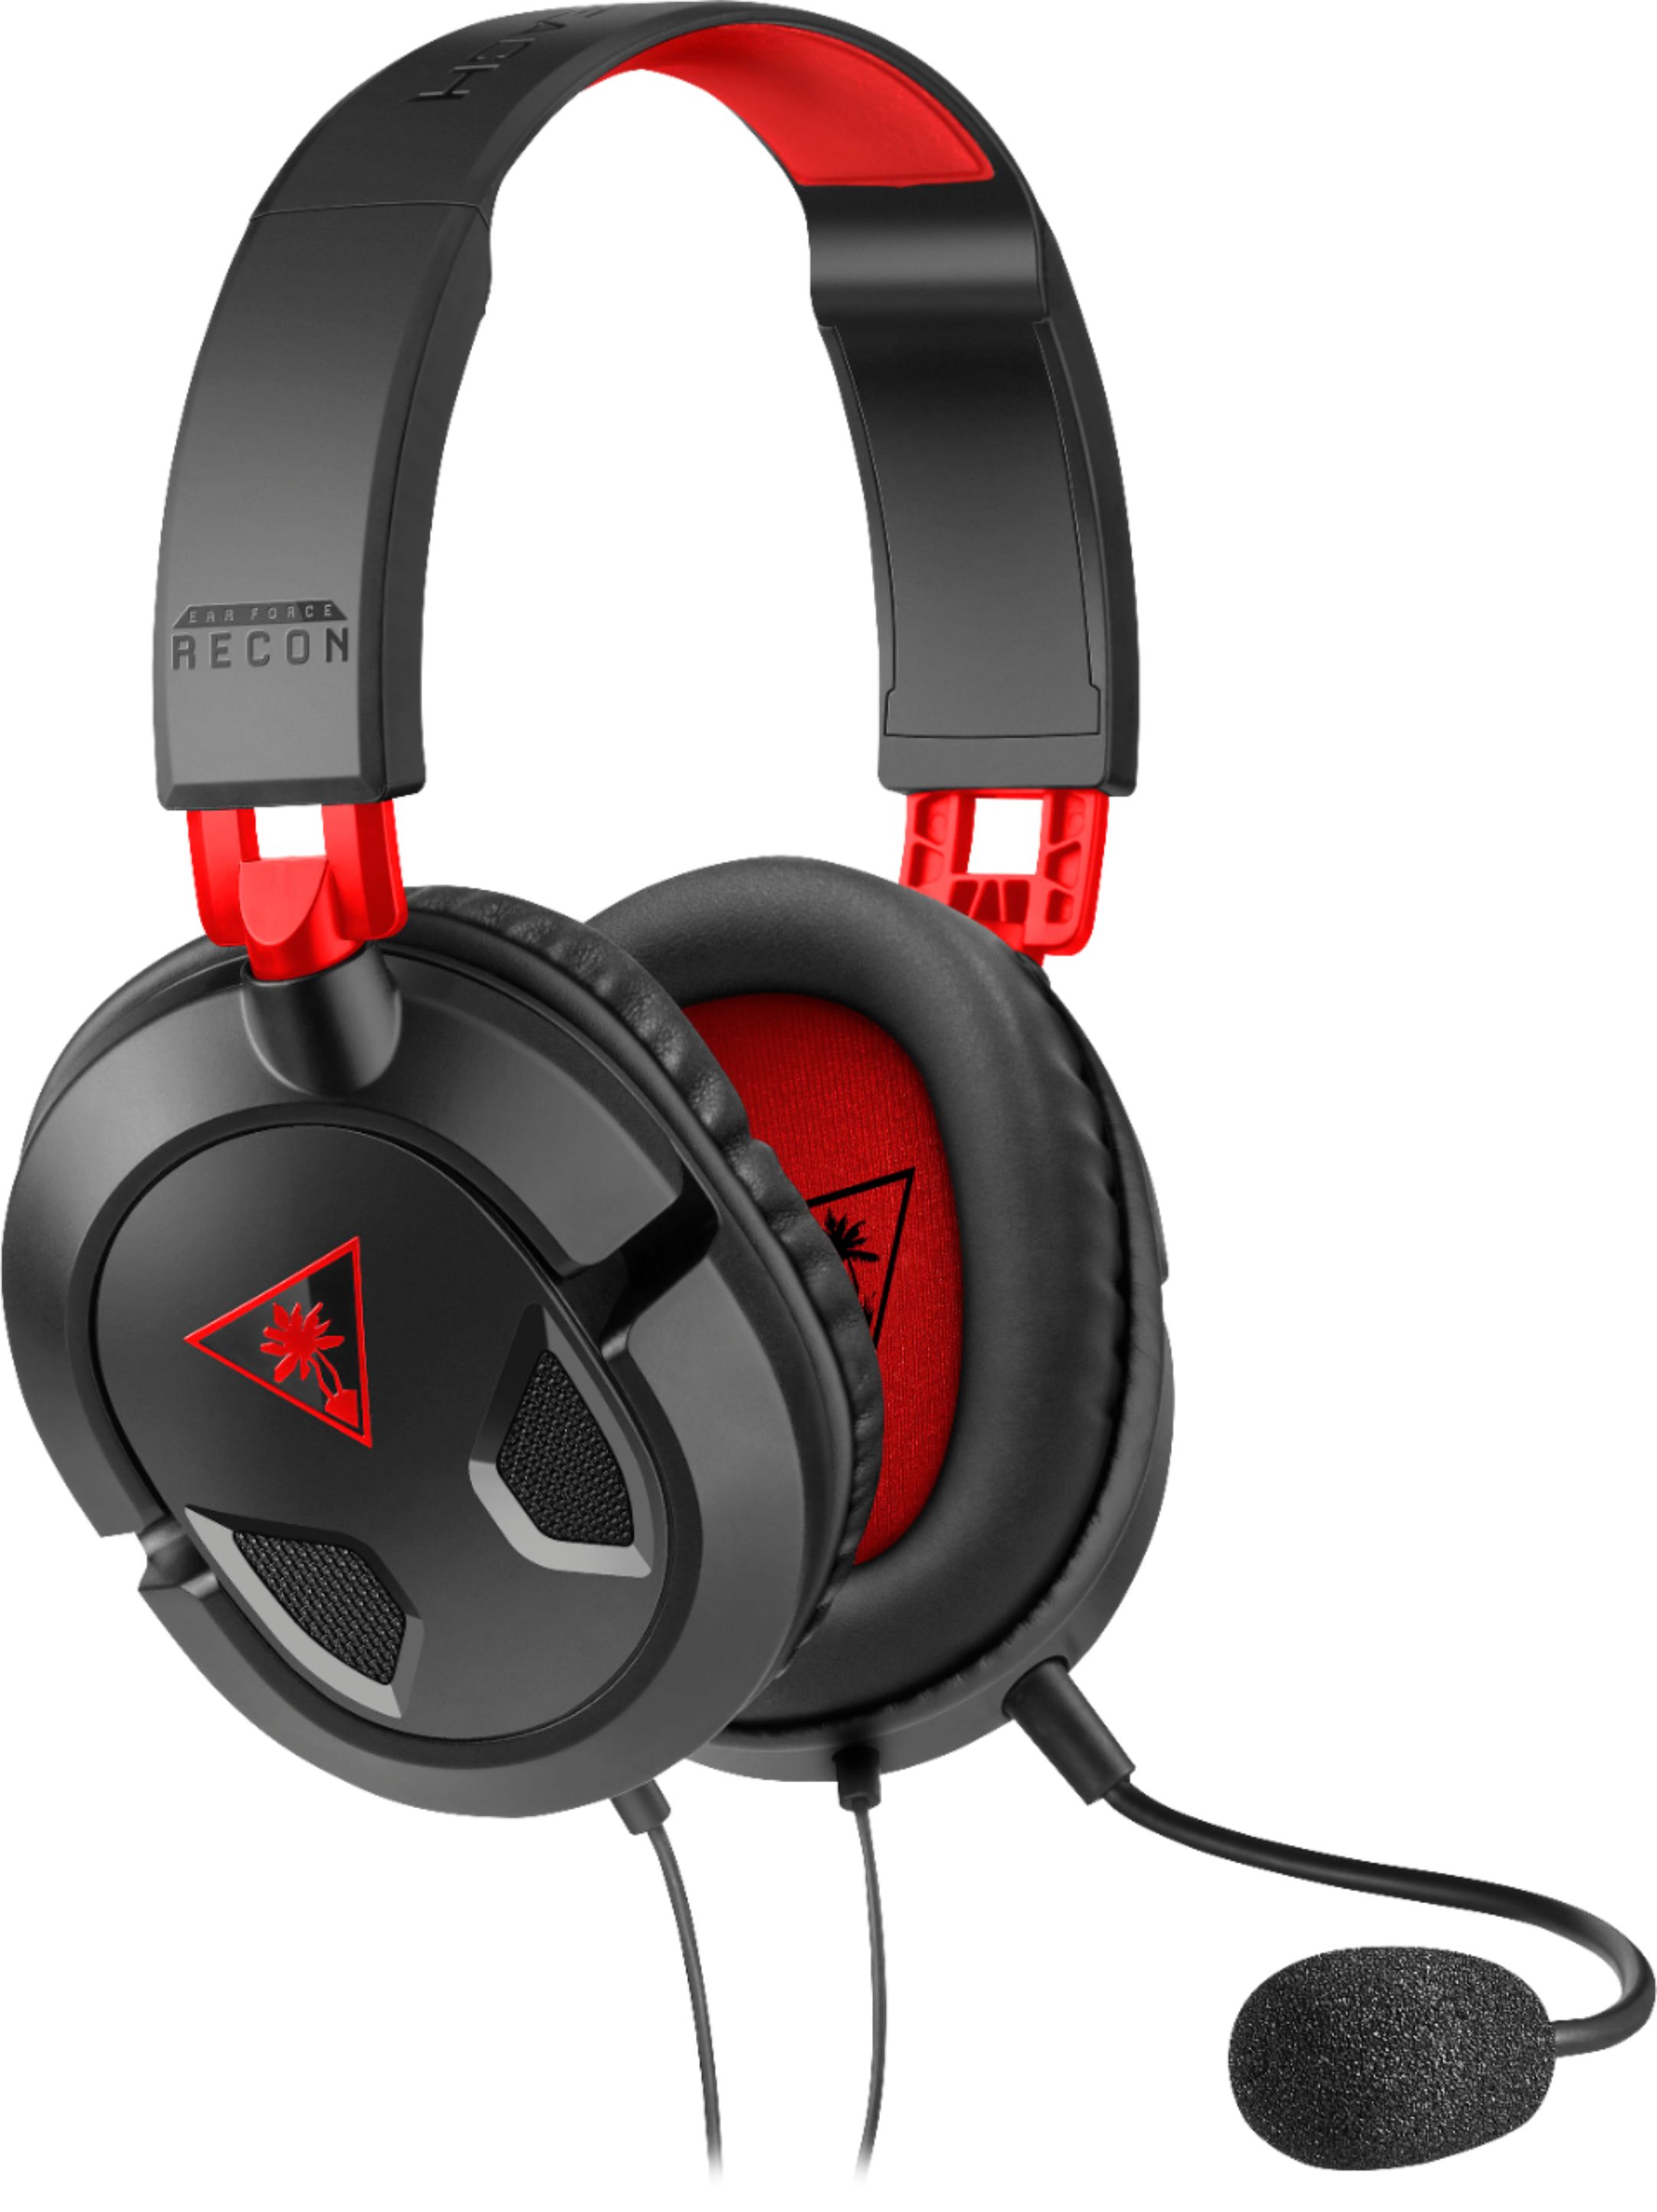 headset for both ps4 and xbox one